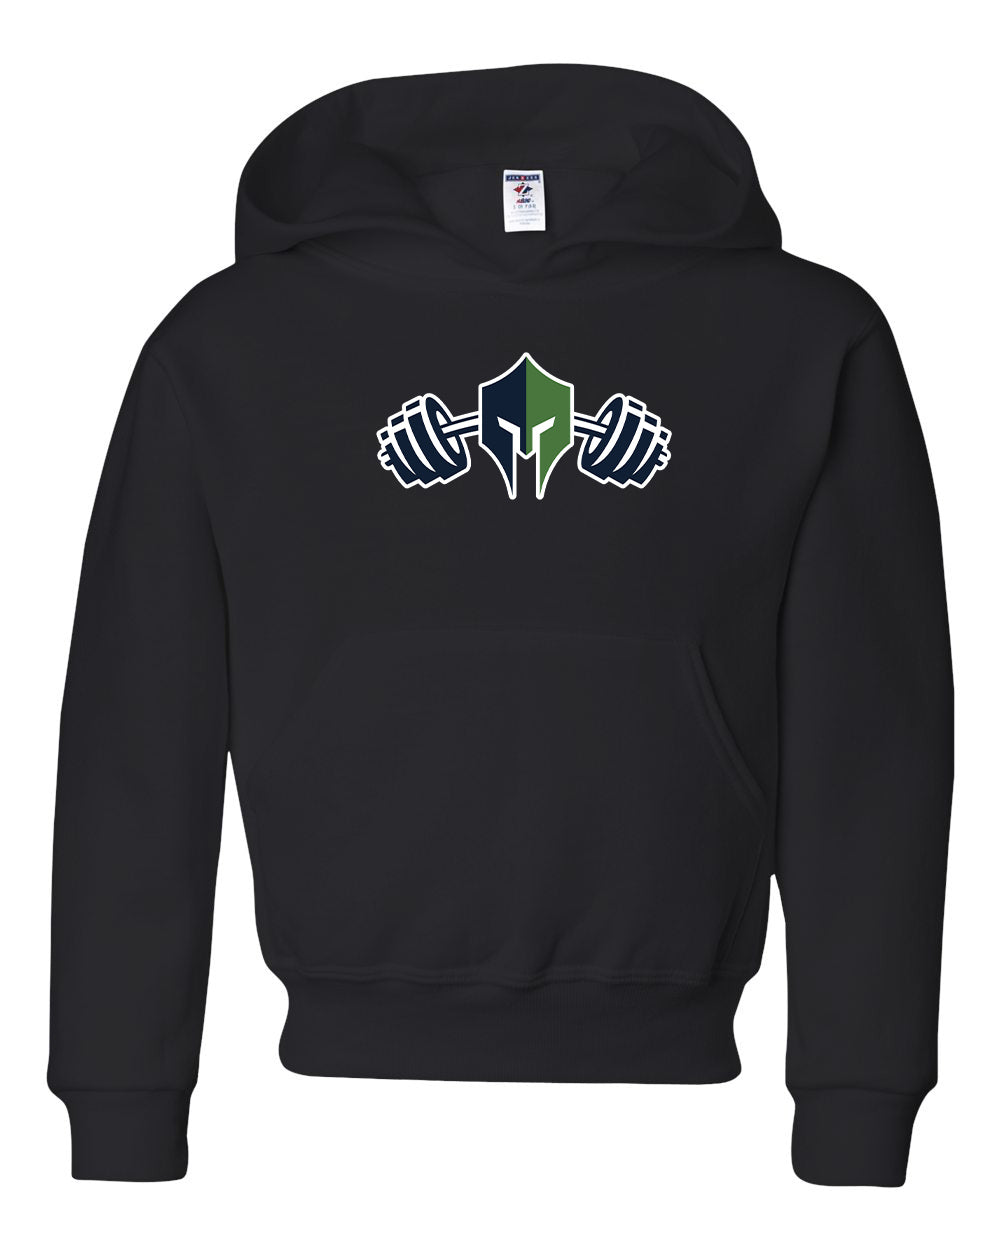 Titans Youth Hoodie "Weights" - 996Y (color options available)